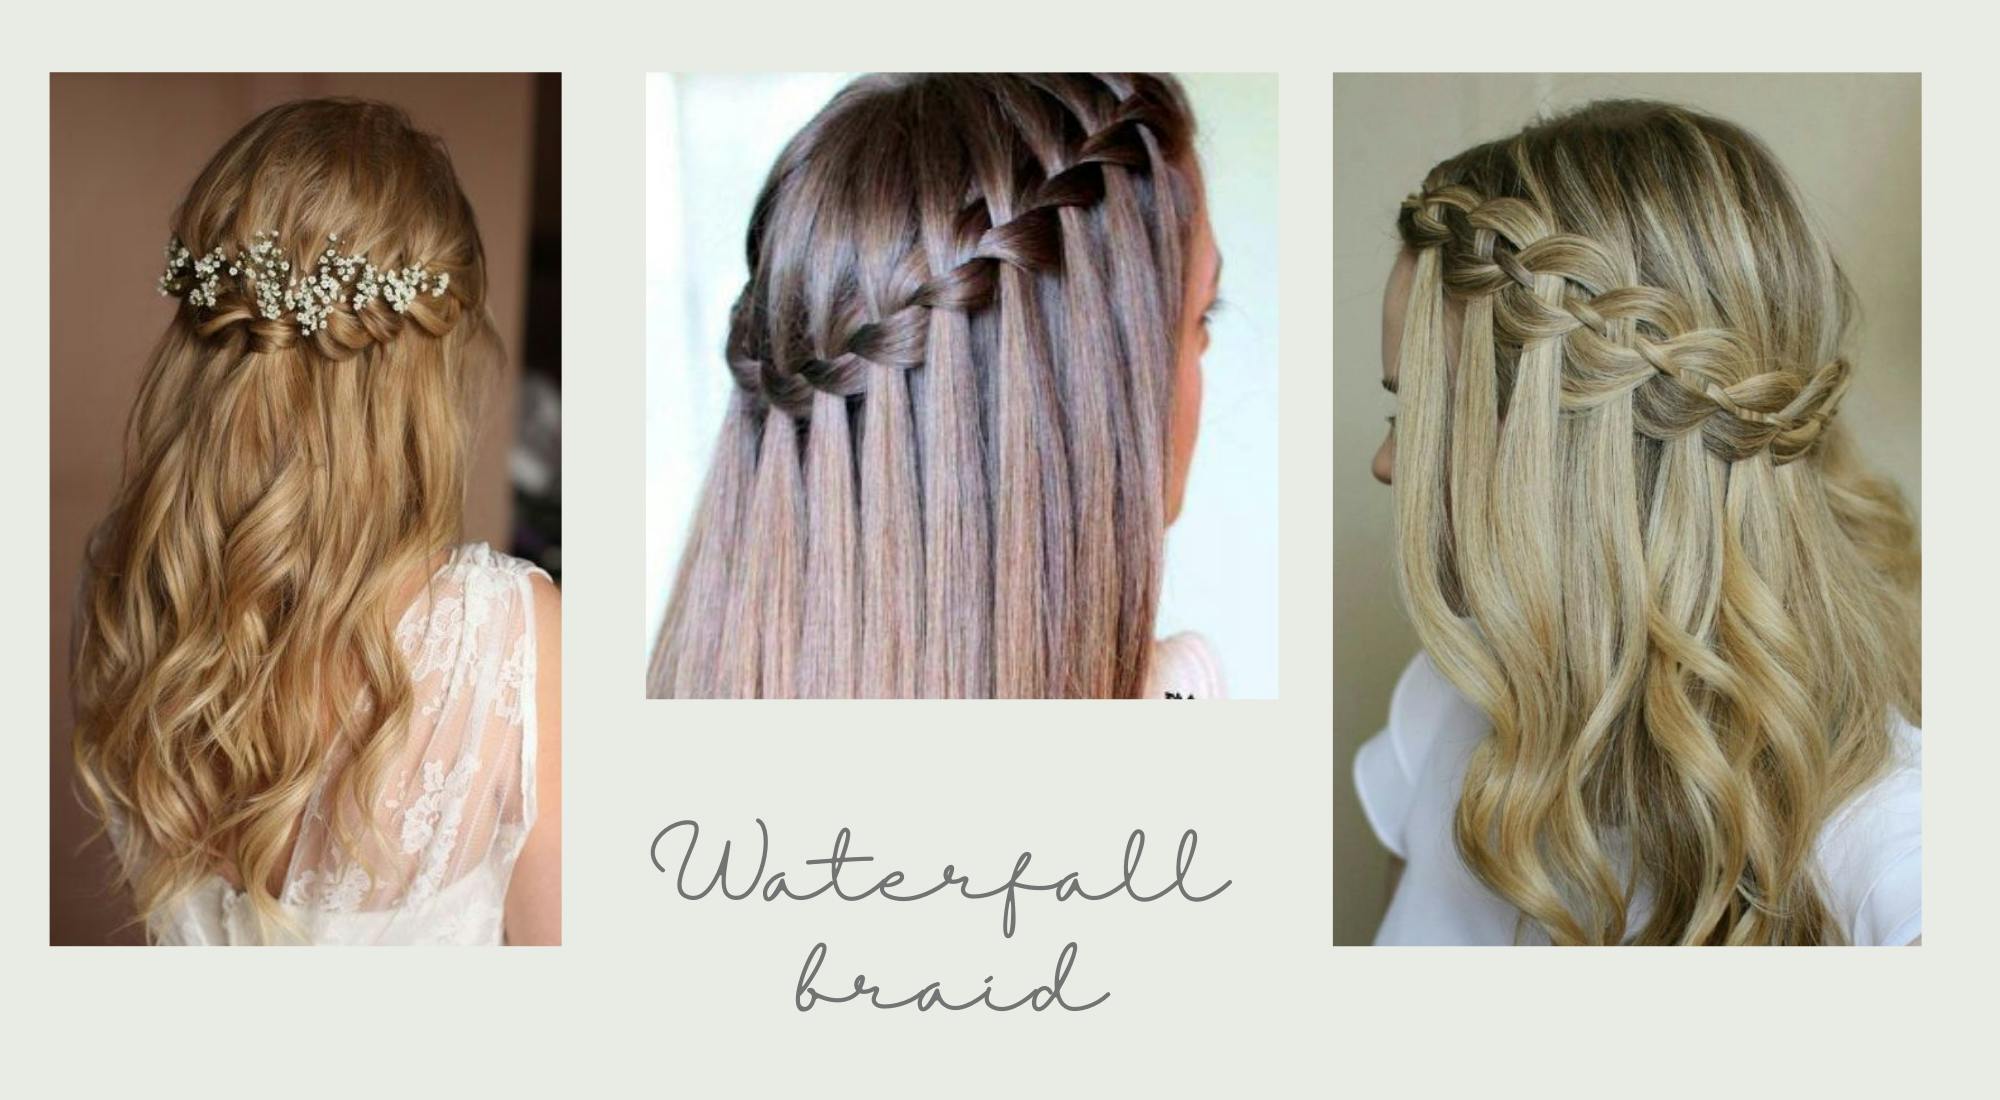 8 beautiful updo hairstyles perfect for any social event | blow LTD